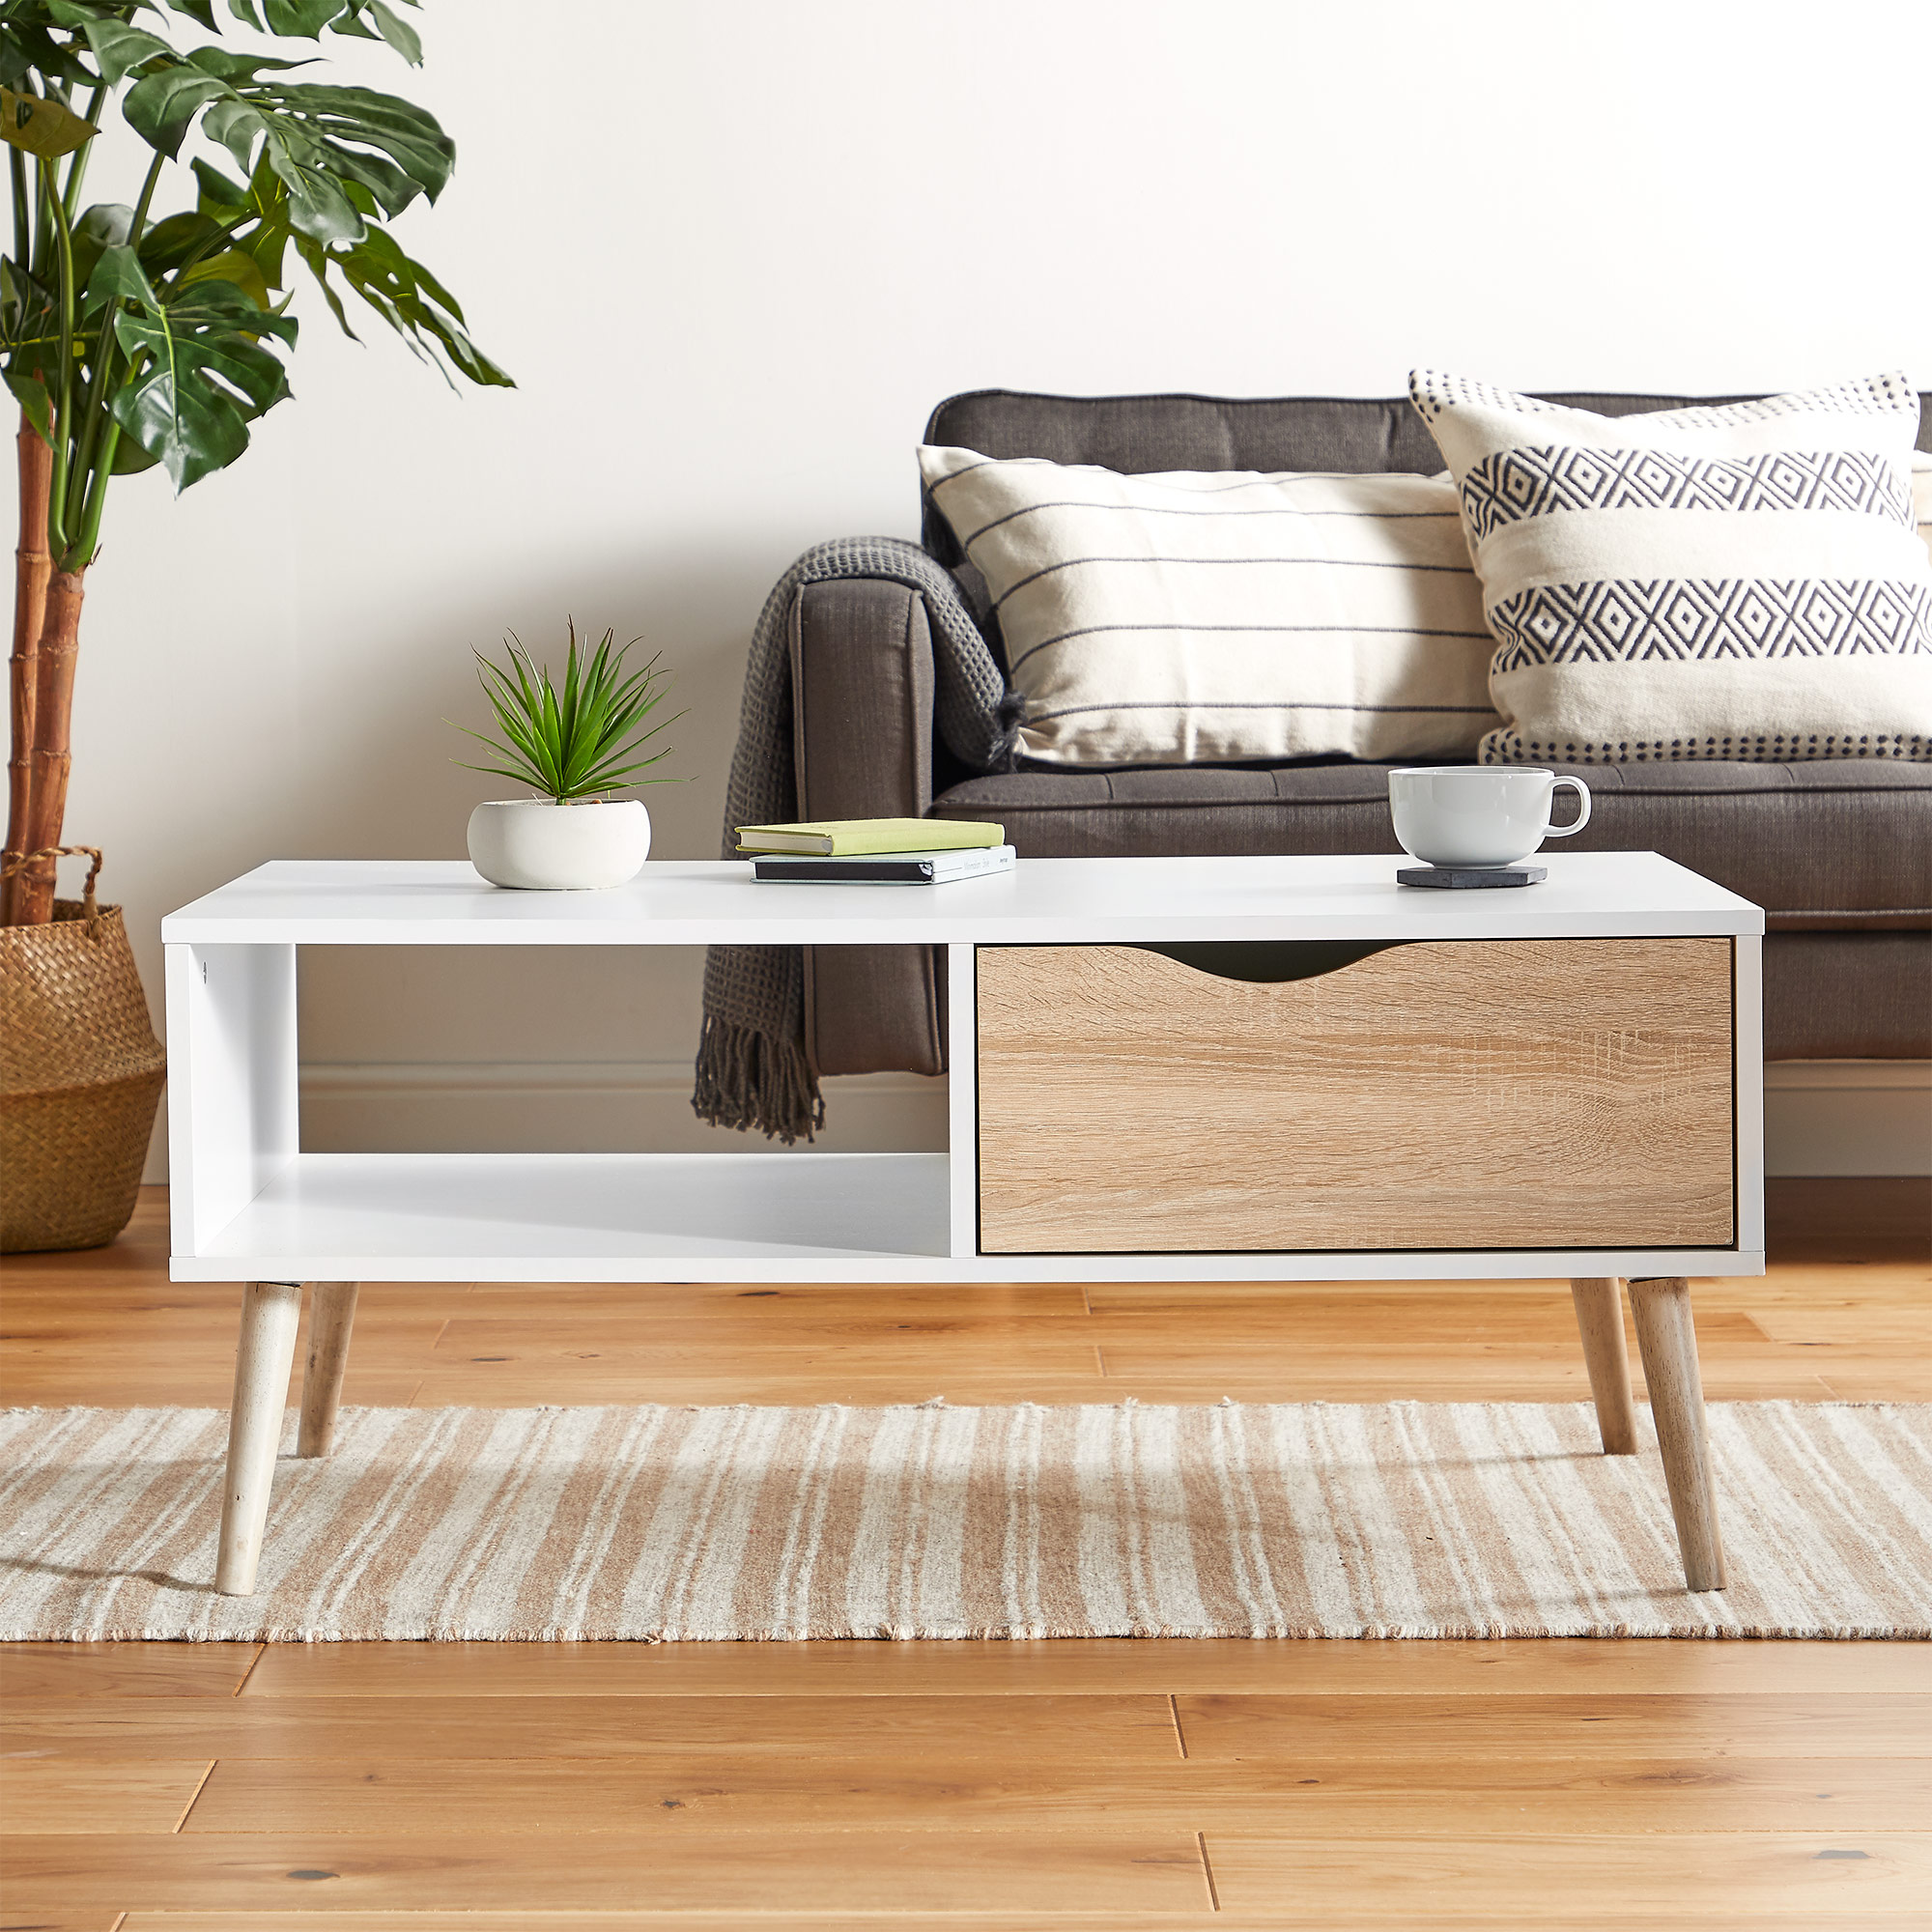 VonHaus Coffee Table with Drawer - Scandinavian Nordic Style - White and Light Oak Effect with Tappered Legs